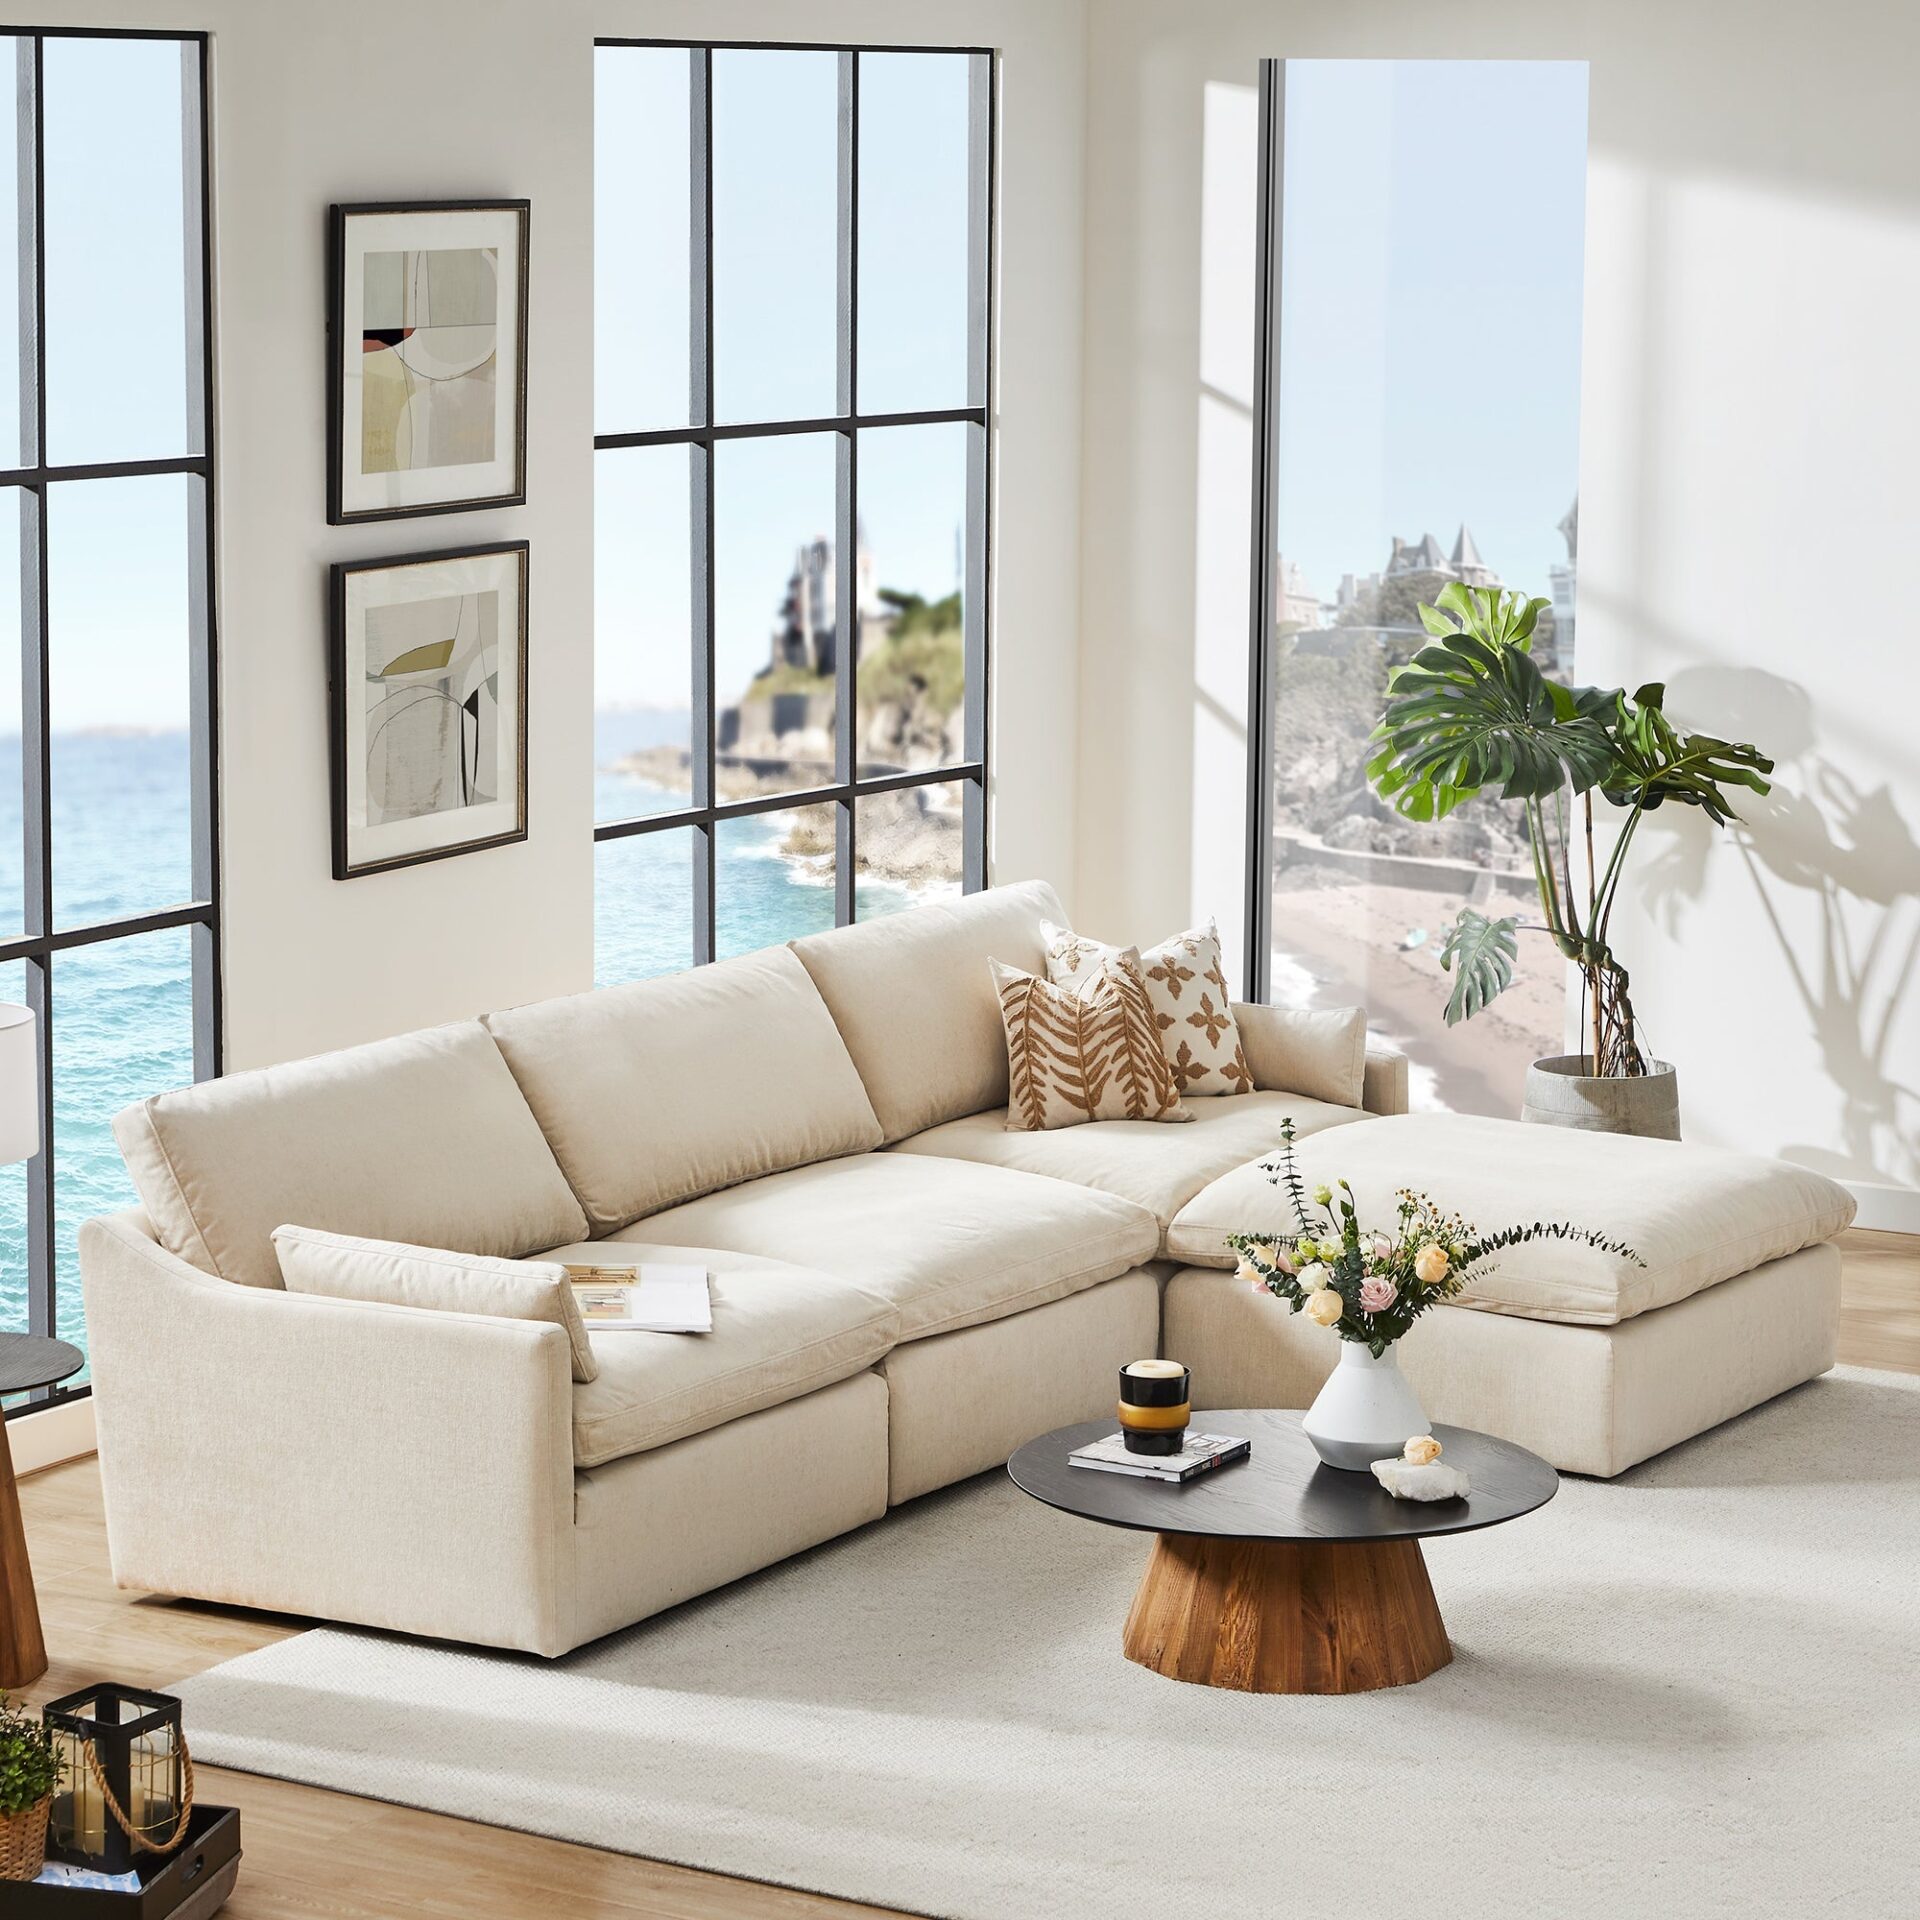 Kenna Modular 4-Piece Sectional Sofa With Chaise - Cream | Inside Decors